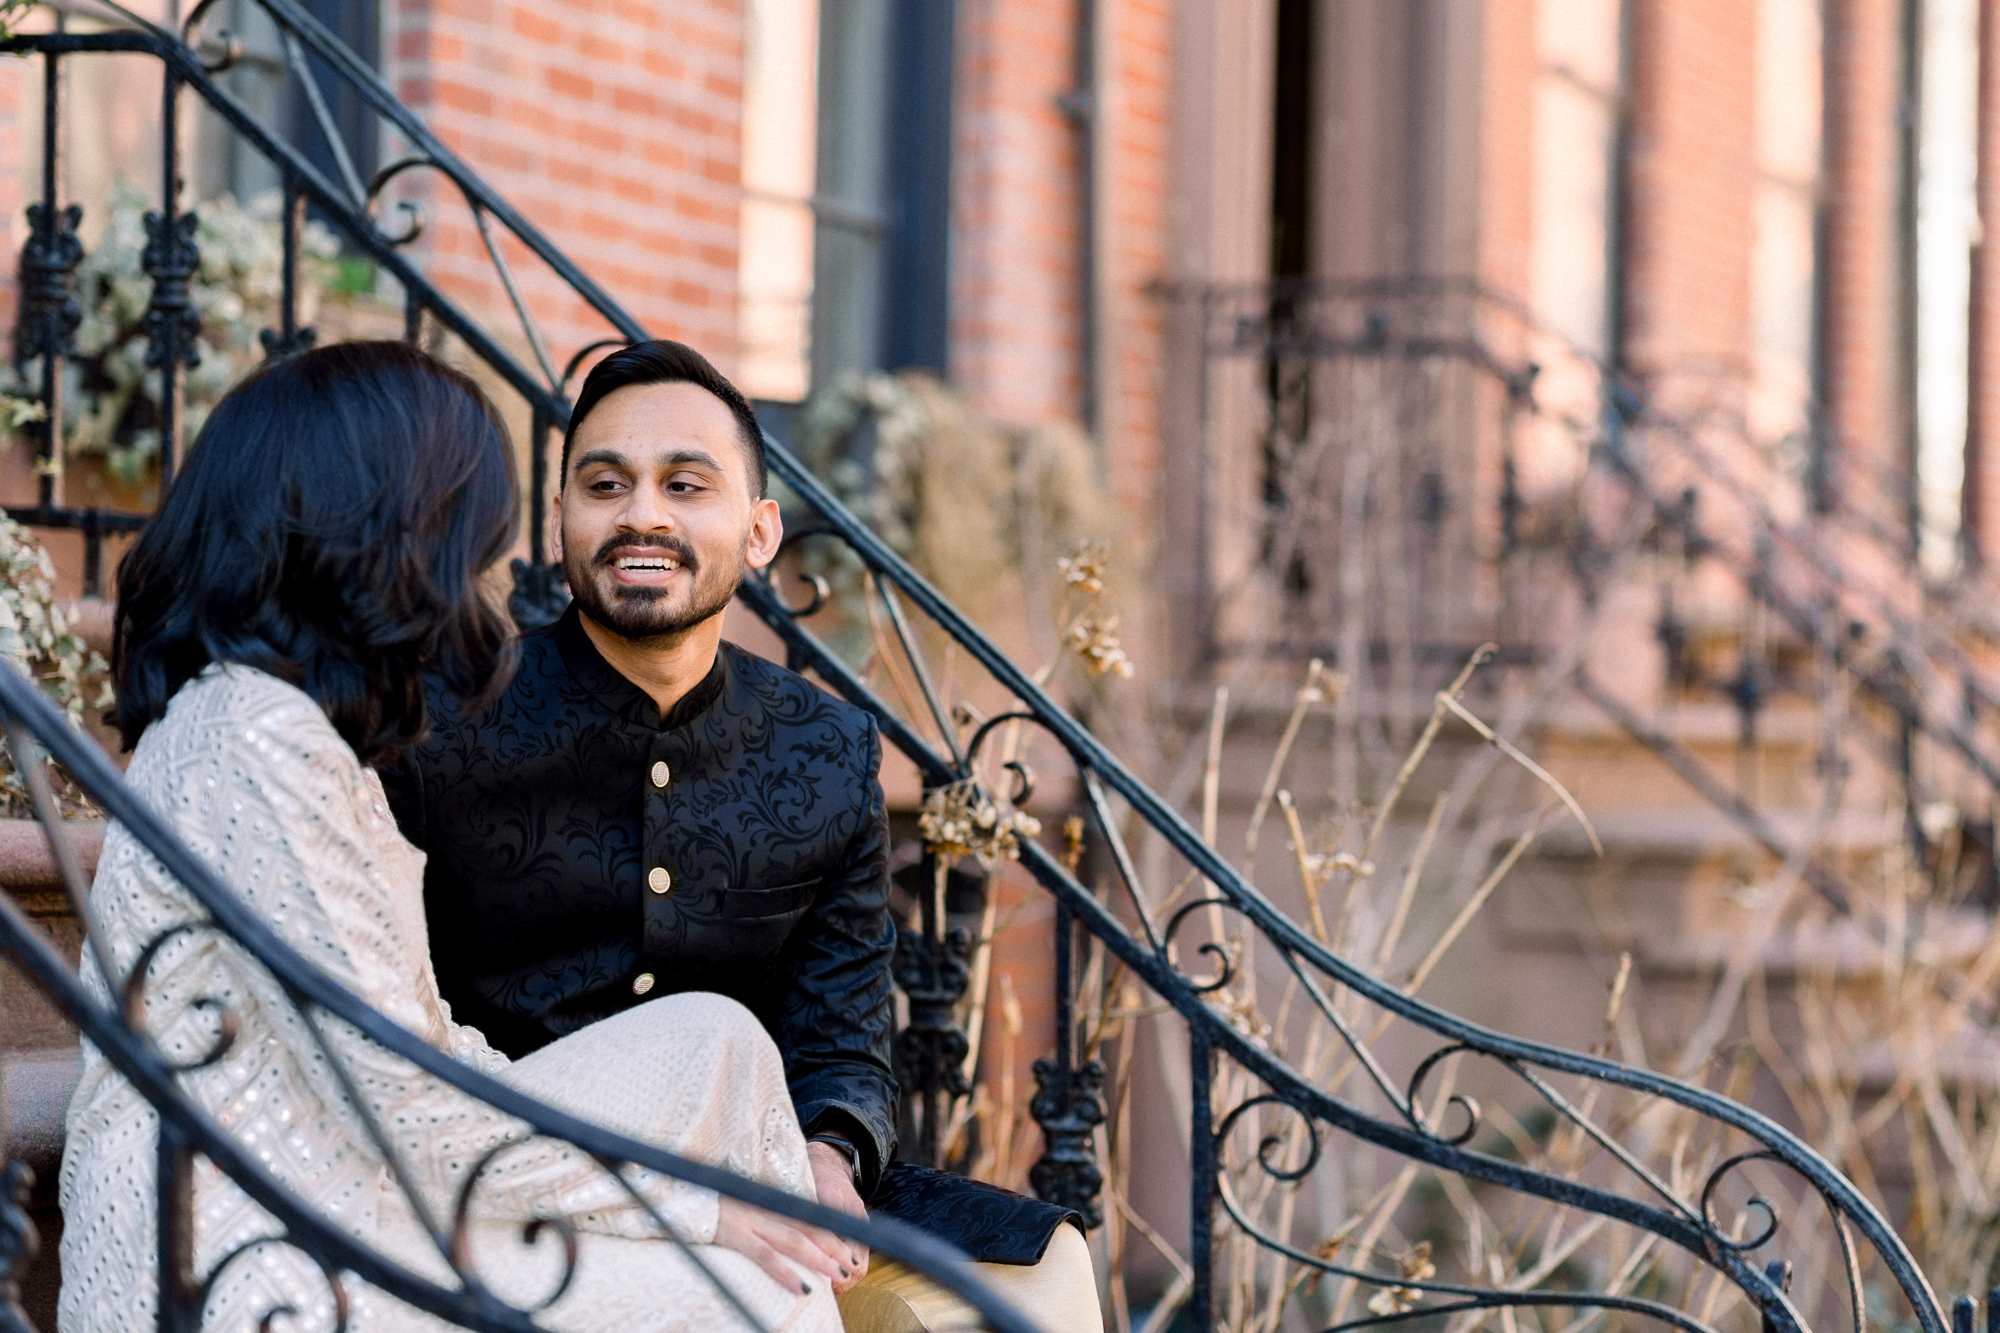 Unique and Wintery Brooklyn Heights Promenade Engagement Photos